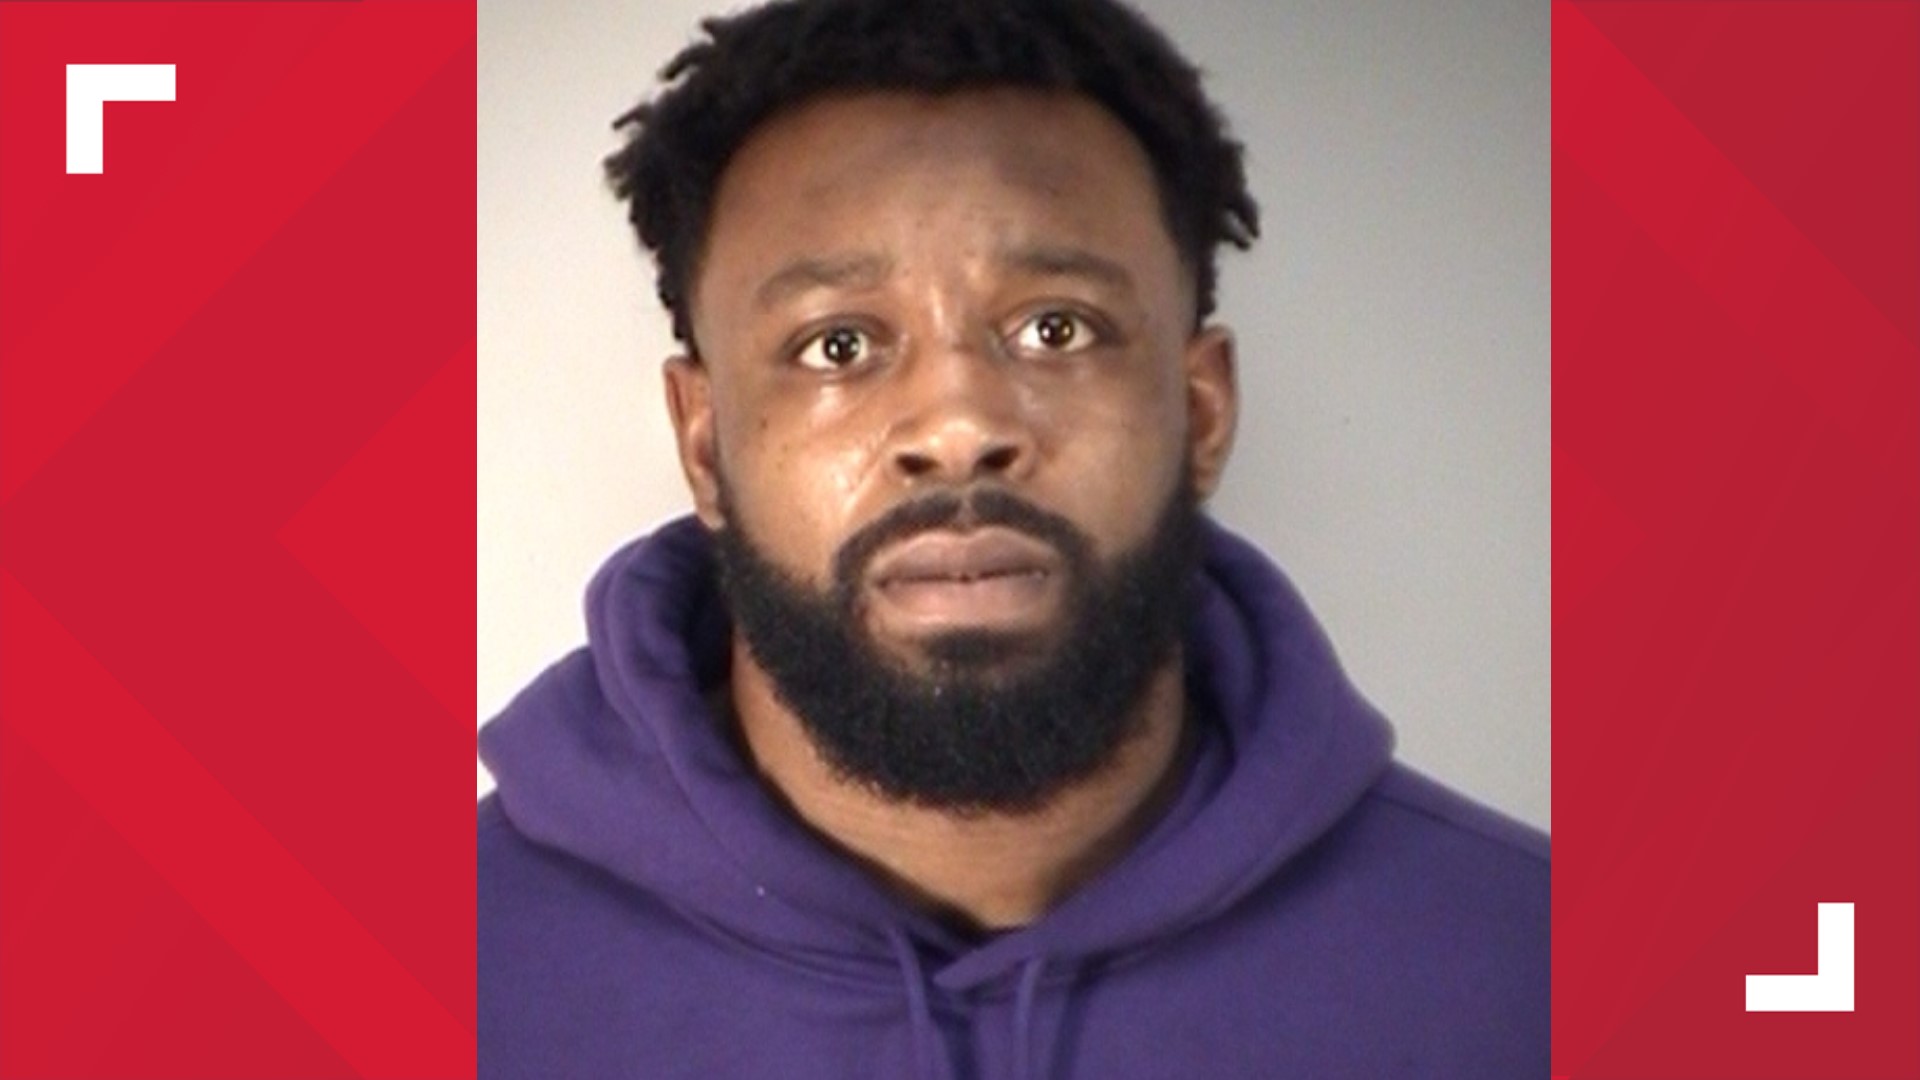 Defensive end, Lerentee McCray, was arrested Sunday around 1:21 a.m. by the Fruitland Park Police Department.